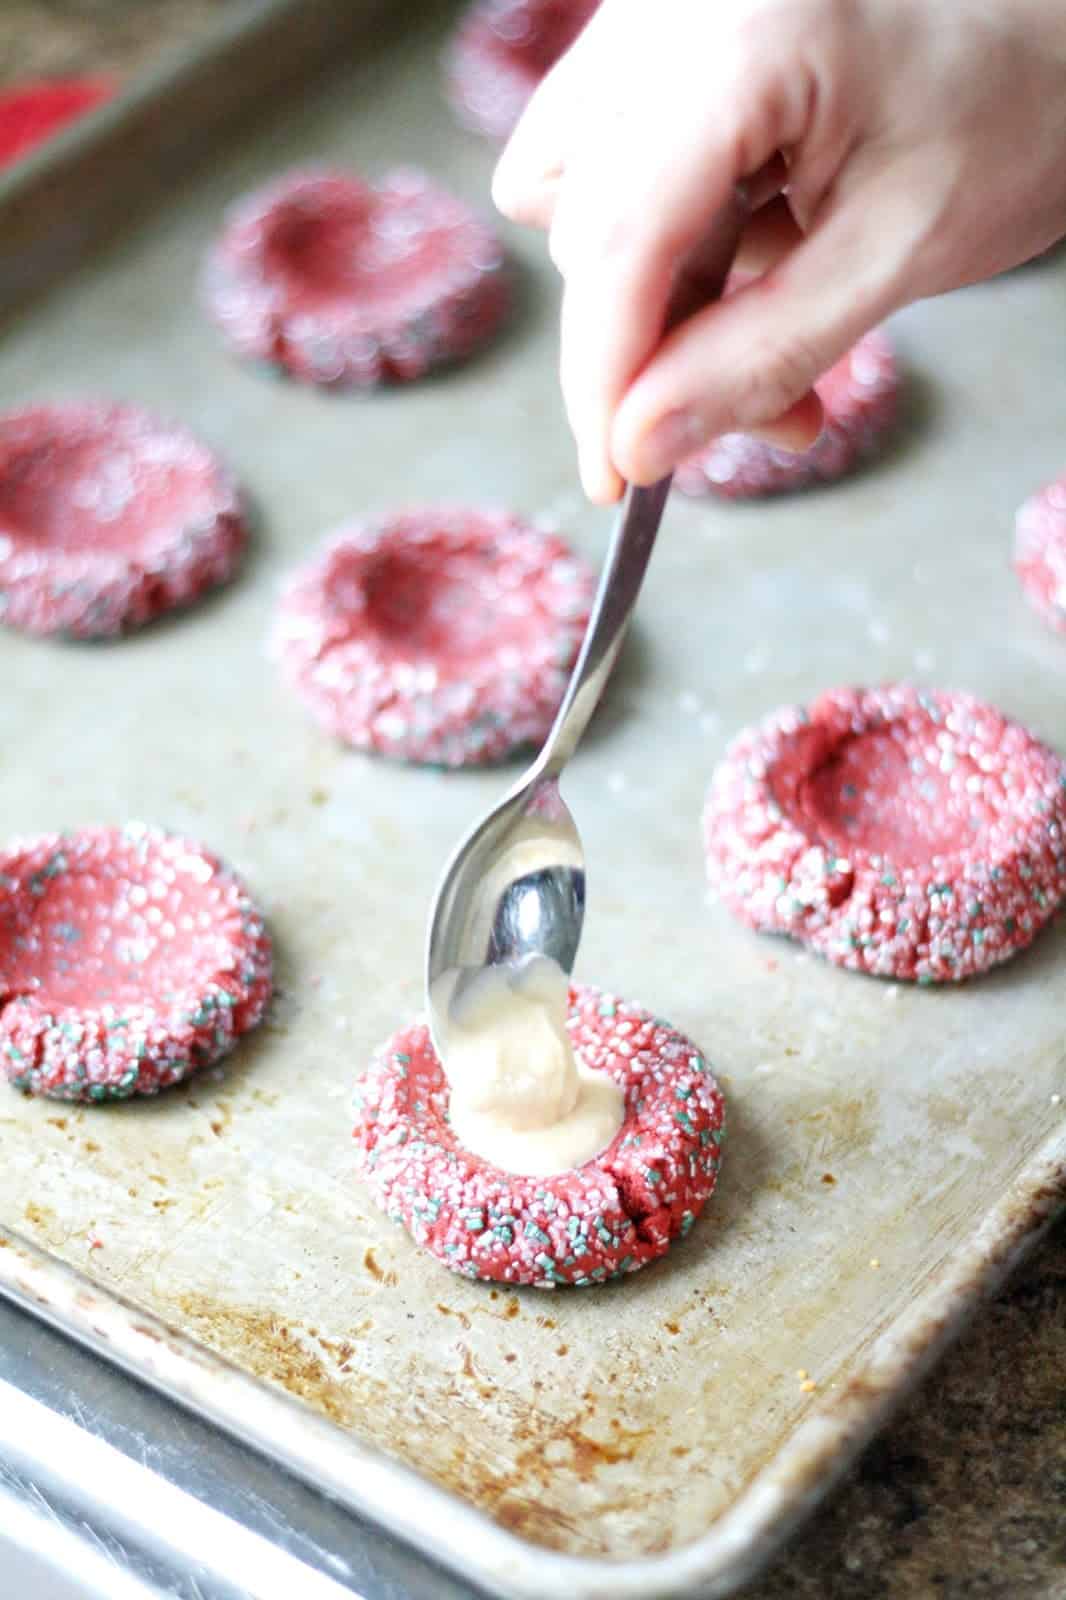 Adding cream cheese filling to the cookies with a spoon